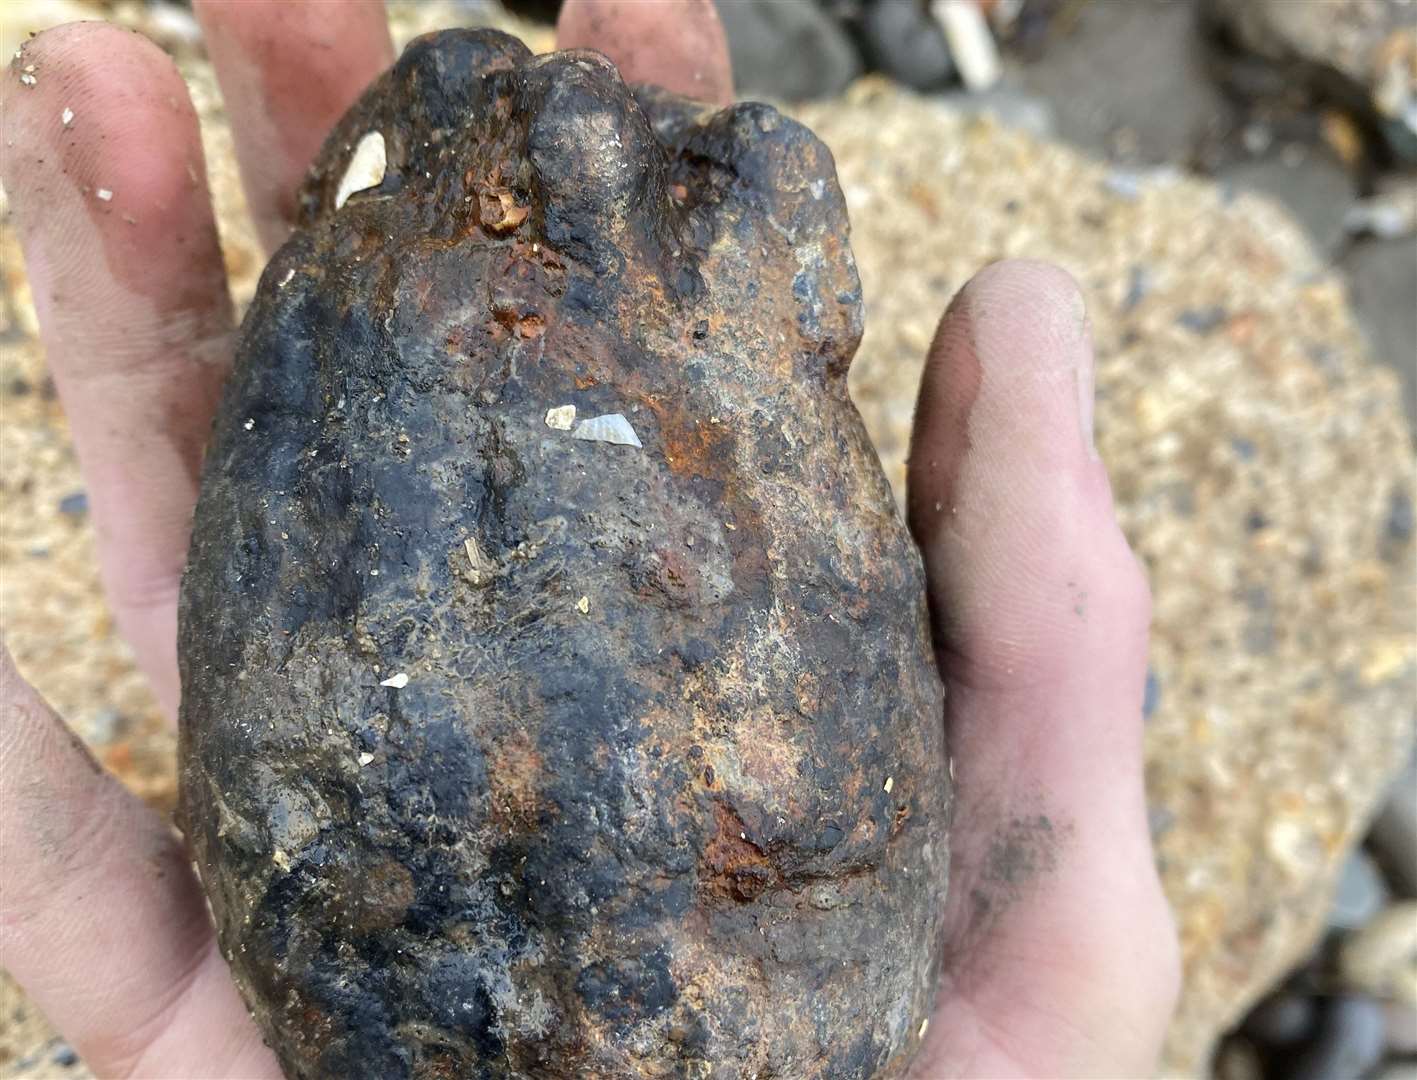 Bomb squad officers blew up this old hand-grenade found on the beach. Picture: Cameron Carron